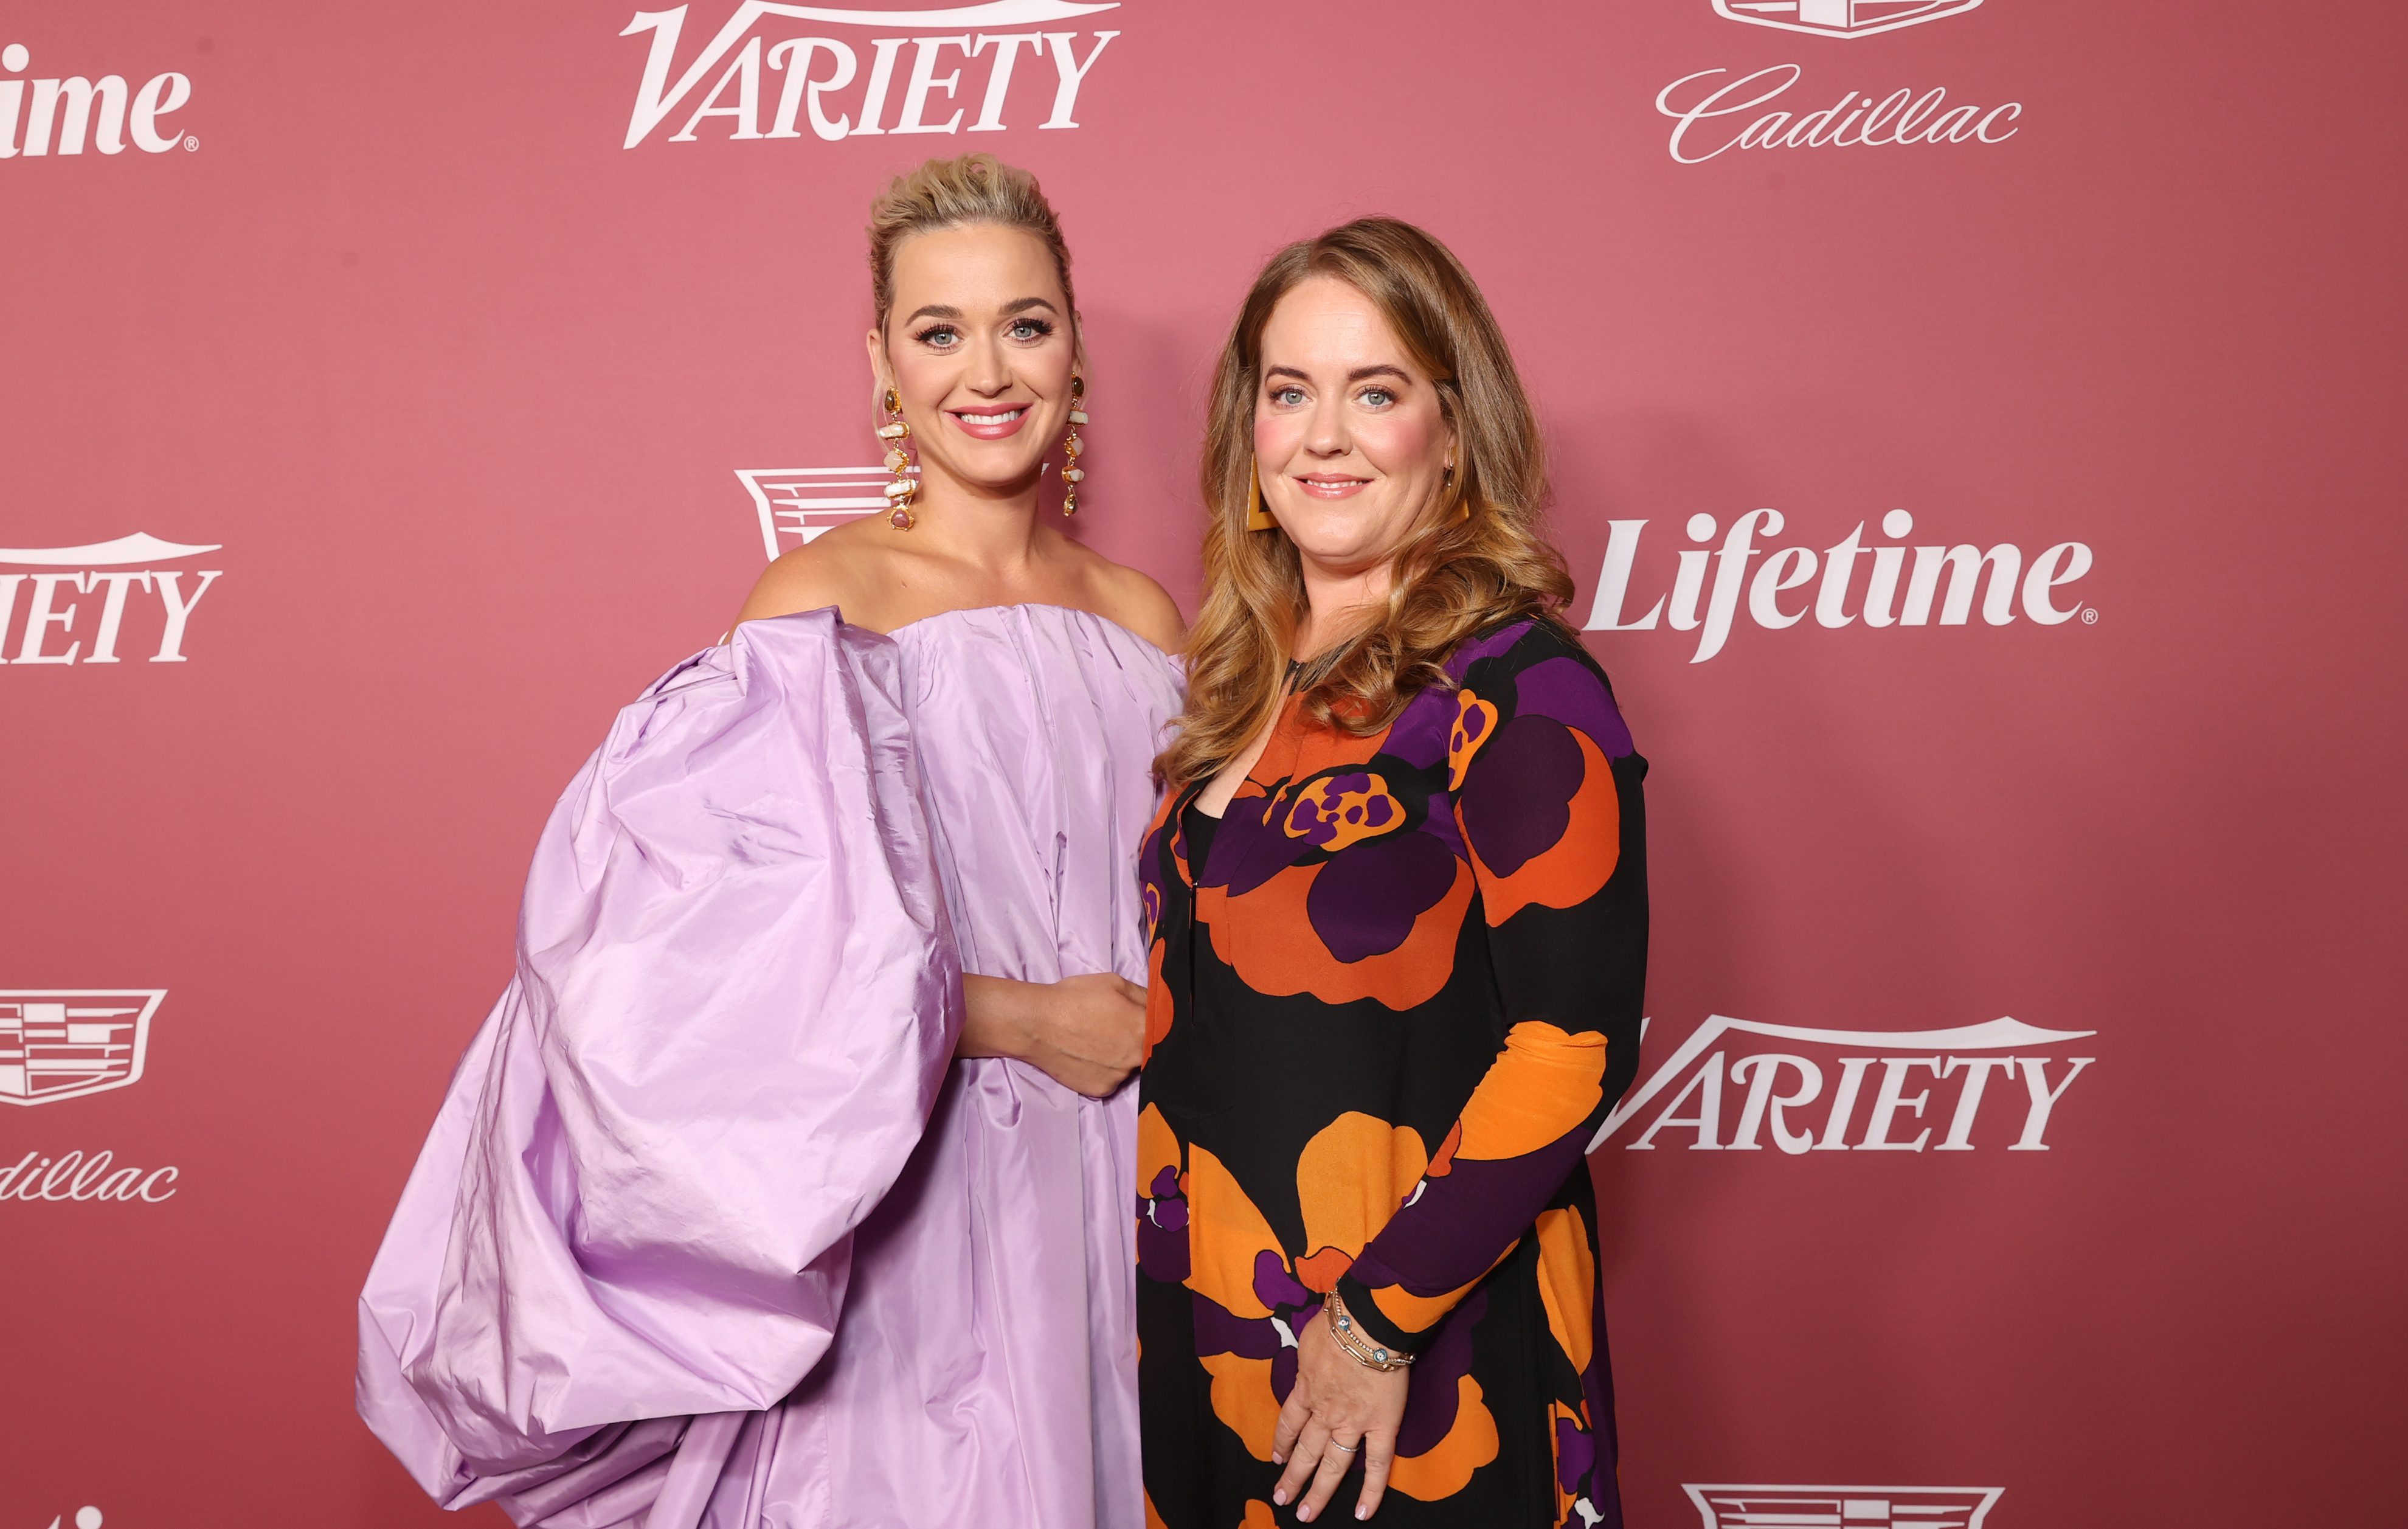 BEVERLY HILLS, CALIFORNIA - SEPTEMBER 30: (L-R) Katy Perry and Angela Hudson attend Variety's Power of Women Presented by Lifetime at Wallis Annenberg Center for the Performing Arts on September 30, 2021 in Beverly Hills, California.